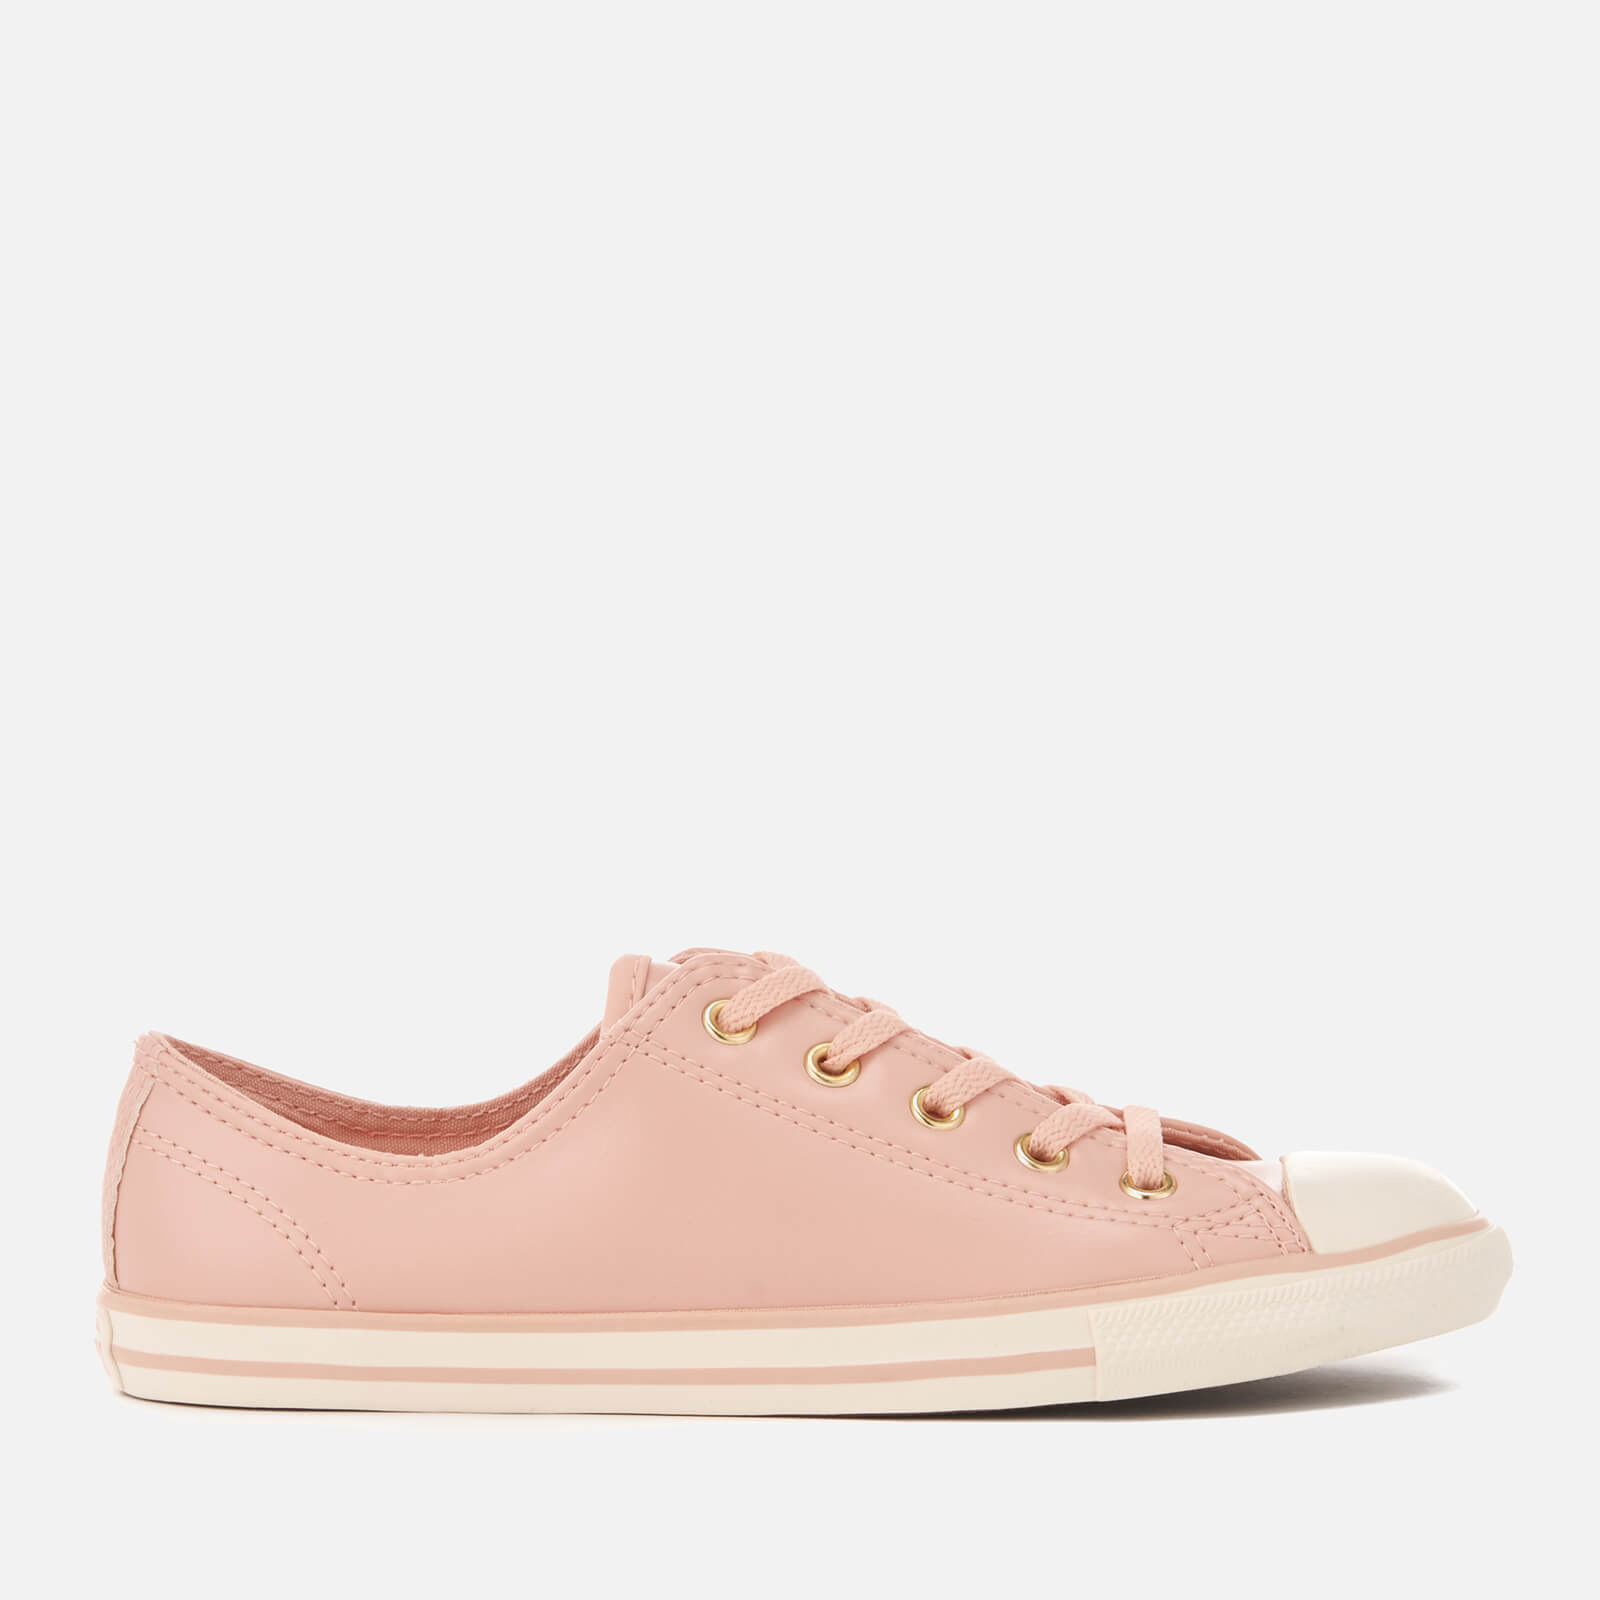 converse all star dainty pink leather